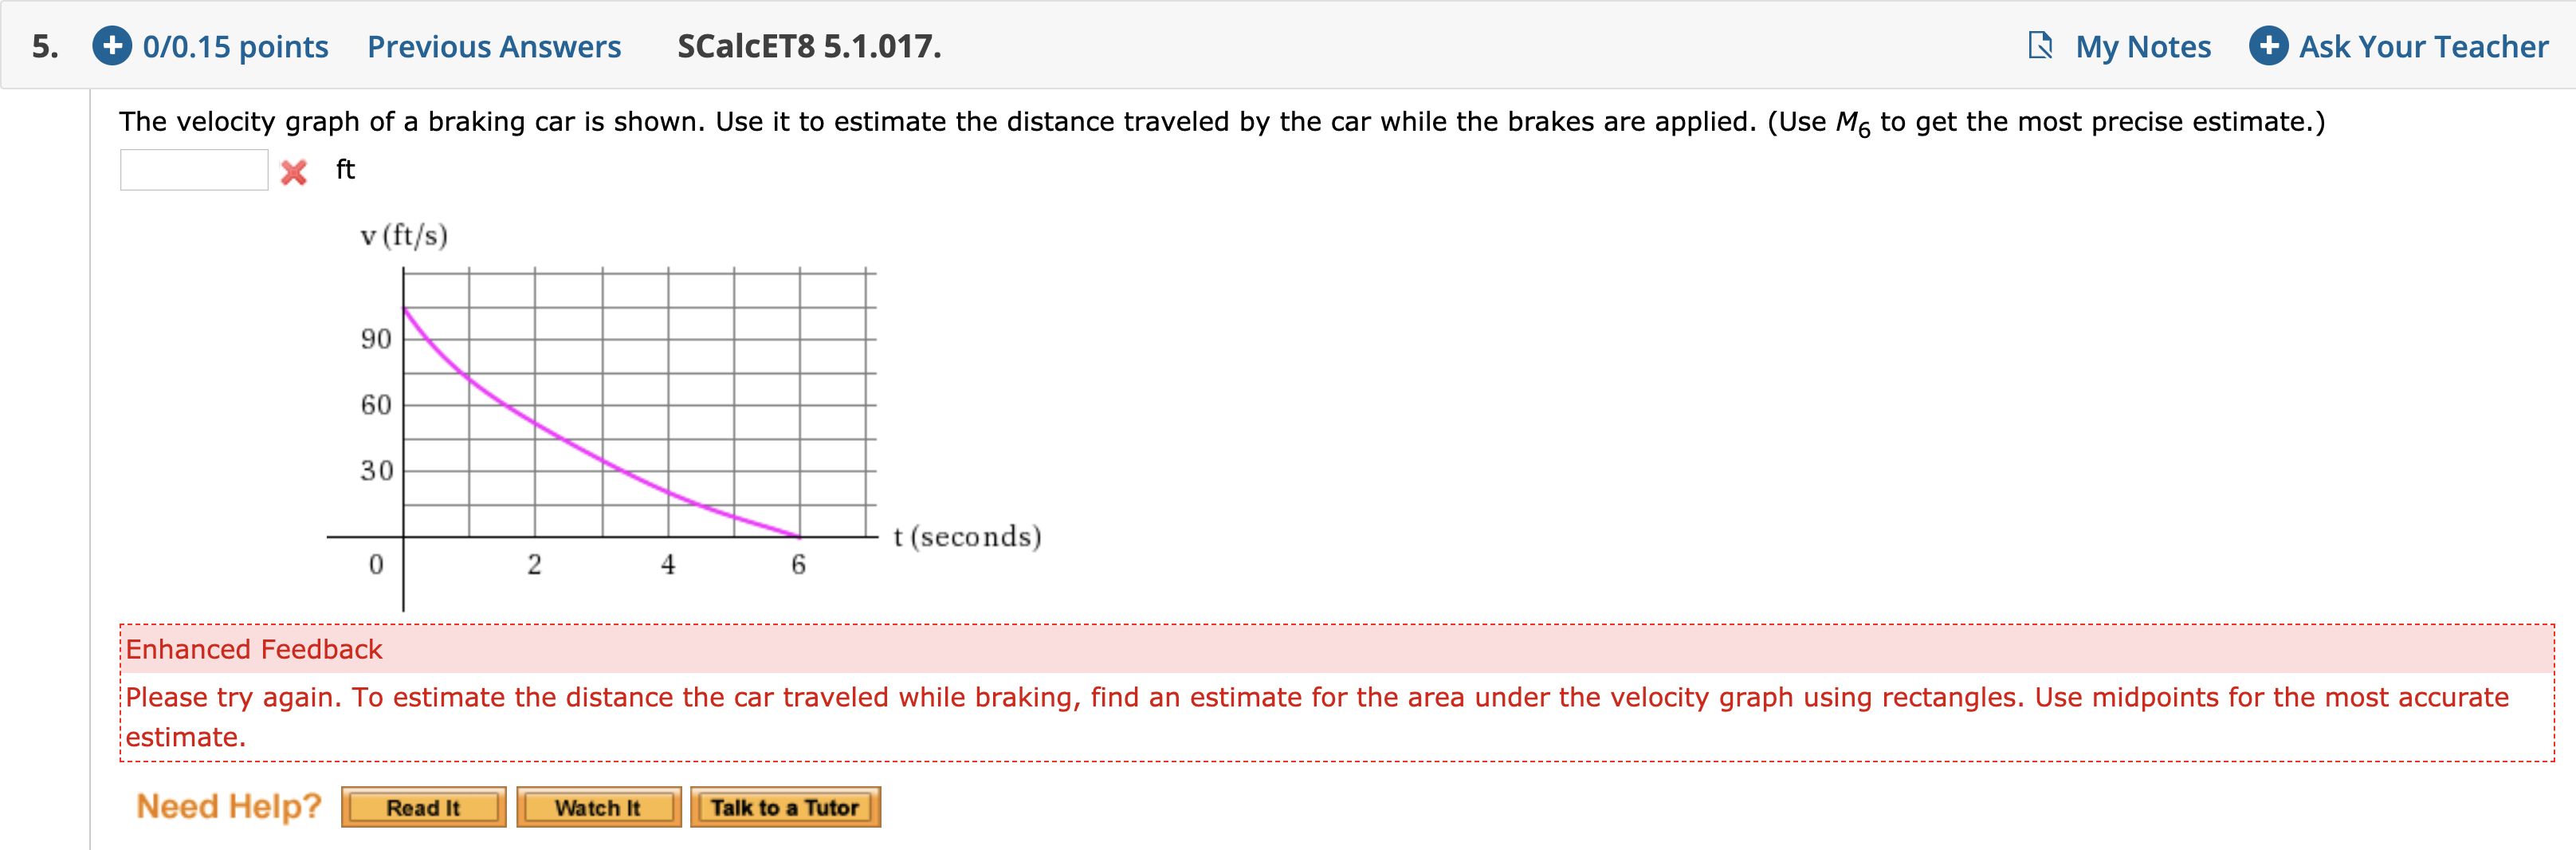 +0/0.15 points
Previous Answers
Ask Your Teacher
SCalcET8 5.1.017.
My Notes
5.
The velocity graph of a braking car is shown. Use it to estimate the distance traveled by the car while the brakes are applied. (Use M6 to get the most precise estimate.)
X ft
v (ft/s)
90
60
30
t (seconds)
2
4
6
Enhanced Feedback
Please try again. To estimate the distance the car traveled while braking, find an estimate for the area under the velocity graph using rectangles. Use midpoints for the most accurate
estimate
Need Help?
Read It
Talk to a Tutor
Watch It
